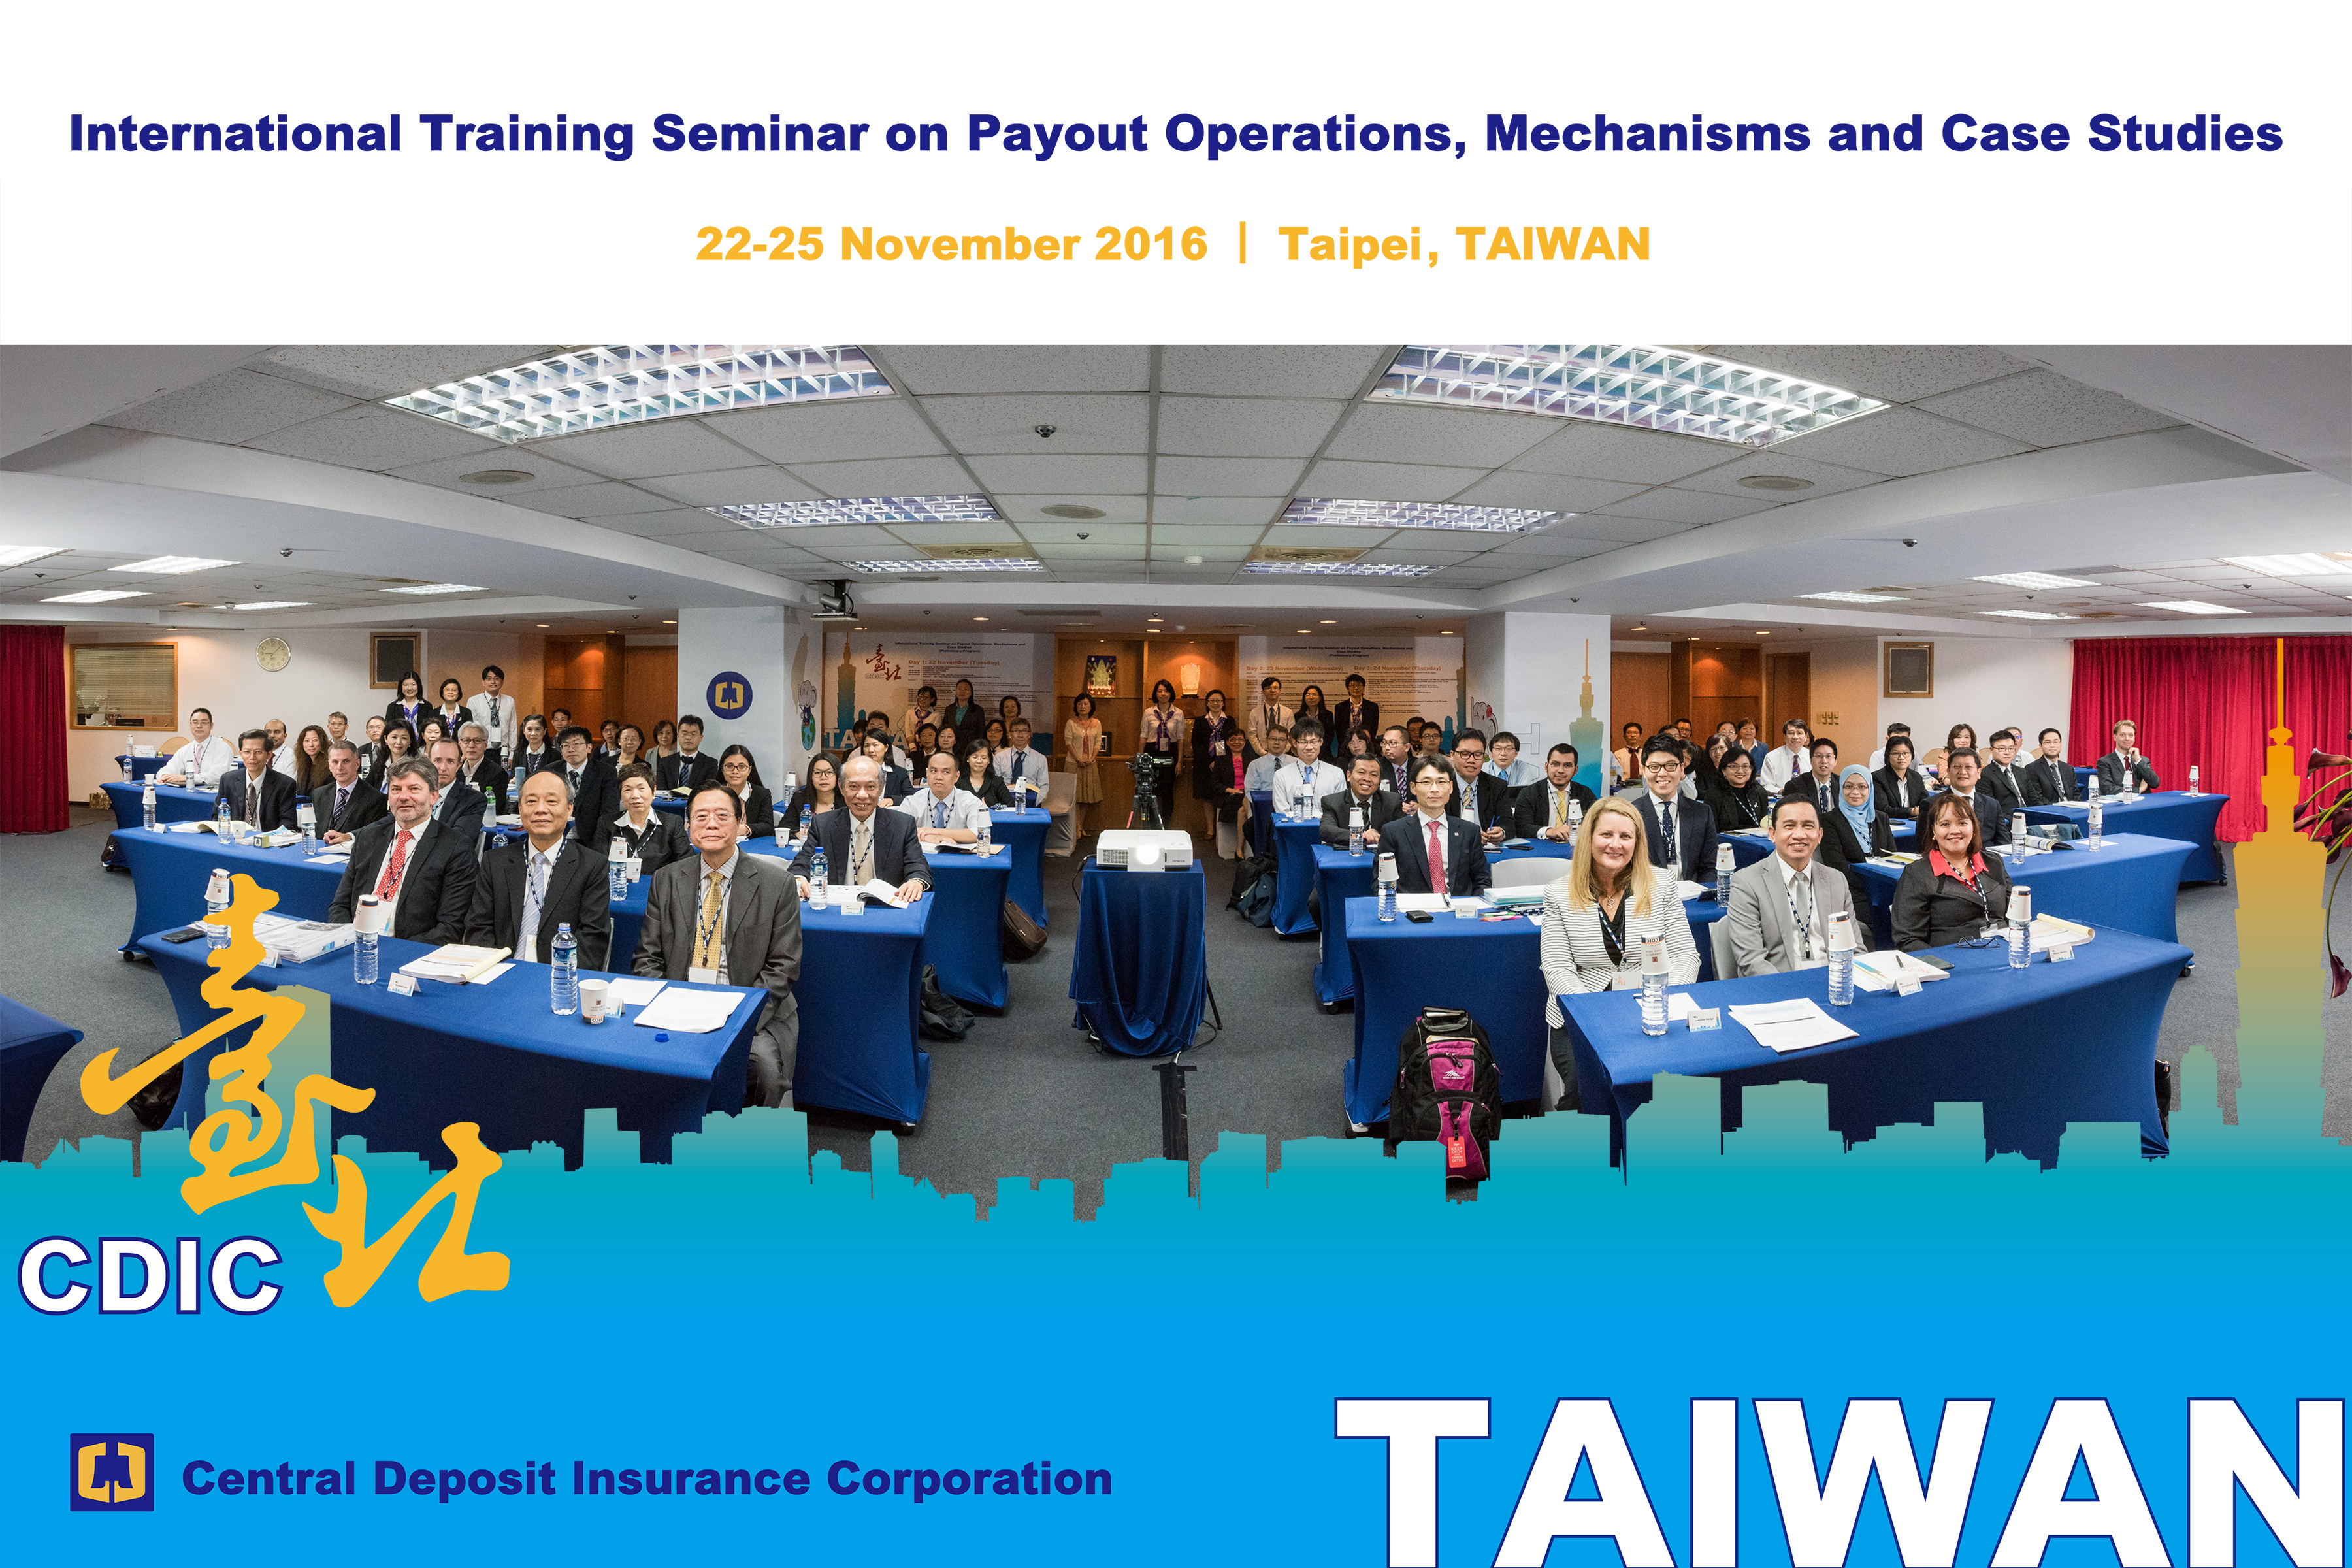 Group photo of the International Training Seminar on Payout Operations, Mechanisms and Case Studies